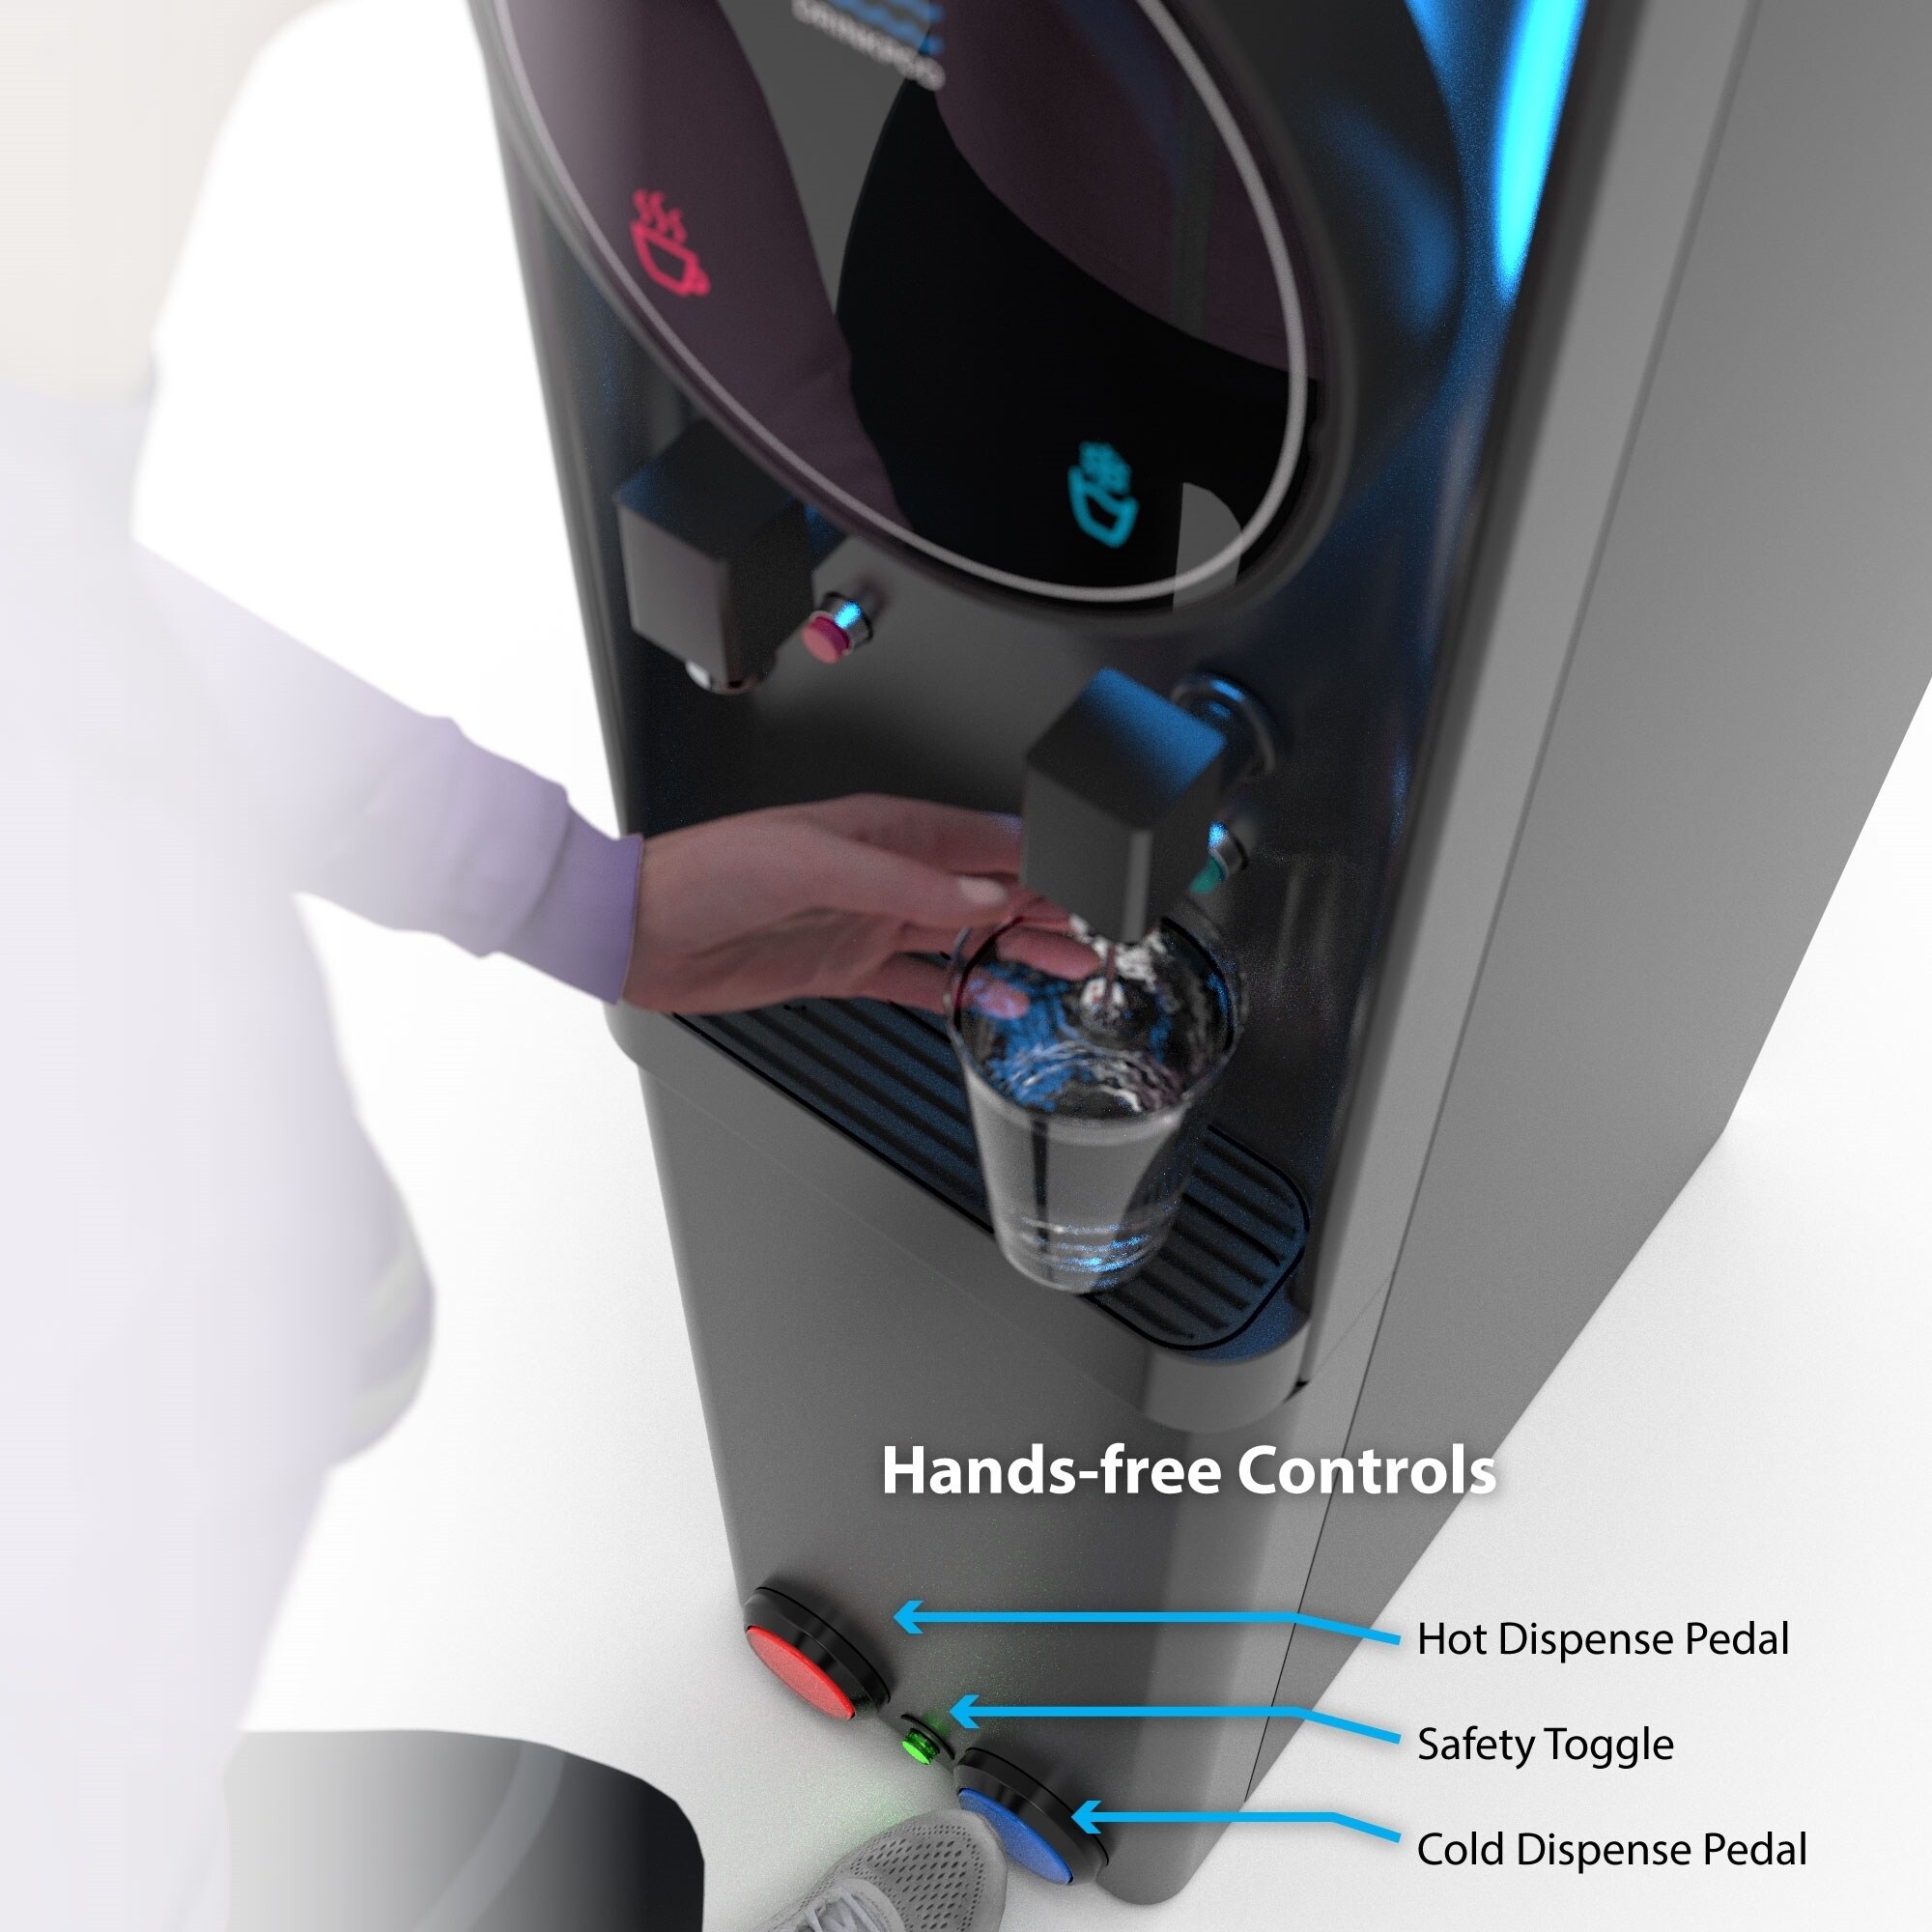 https://ak1.ostkcdn.com/images/products/is/images/direct/87e9671d80a9d021ec1ea79f2f9cf3d347a3442d/Drinkpod-Touchless-Water-Cooler-Dispenser-Hot-abd-Cold-Bottleless-Water-Cooler-with-3%2B-Ultra-Water-Filters-%26-Installation-Kit.jpg